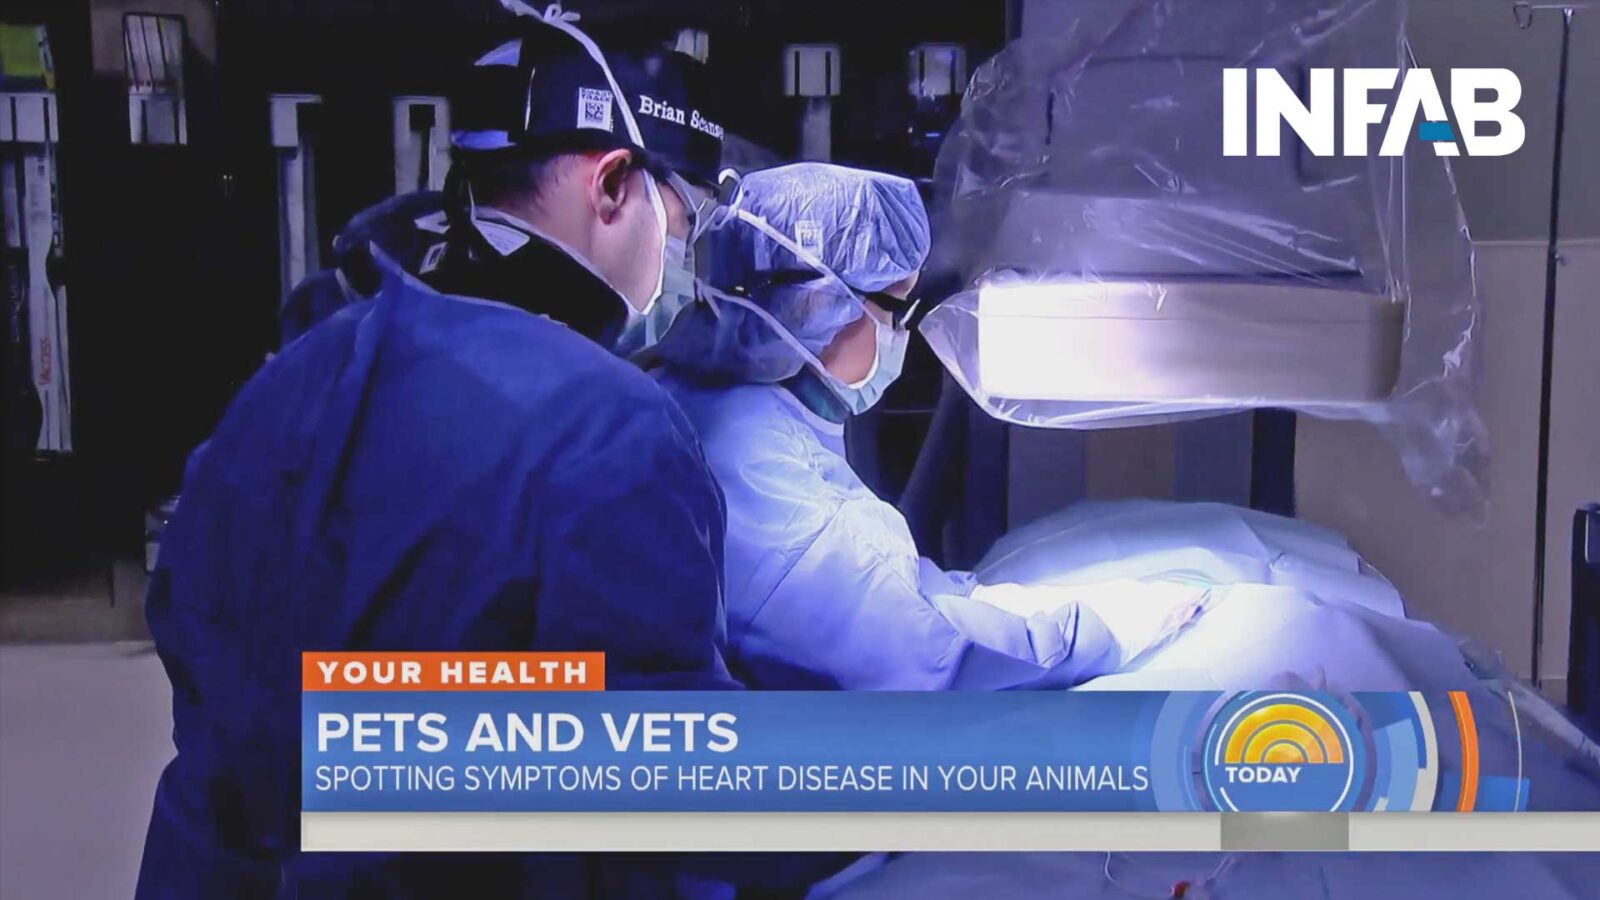 Vets Saving Dogs with Heart Disease featured on TODAY Show with INFAB Protection